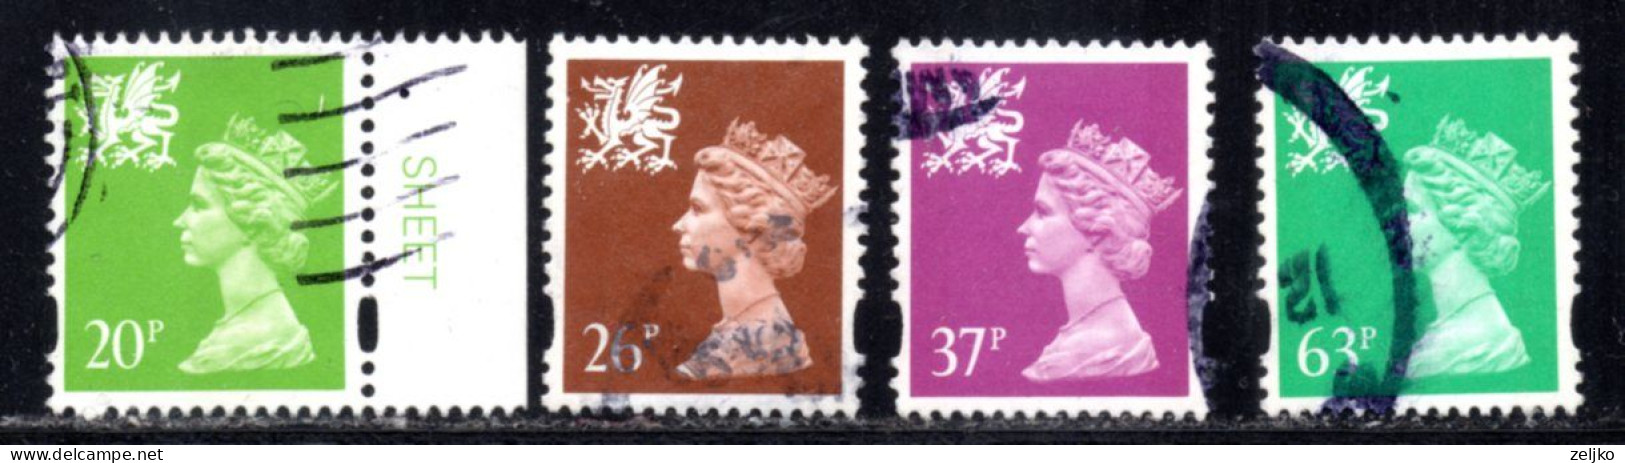 UK, GB, Great Britain, Wales, Used, 1996, Michel 66 - 71 - Pays De Galles